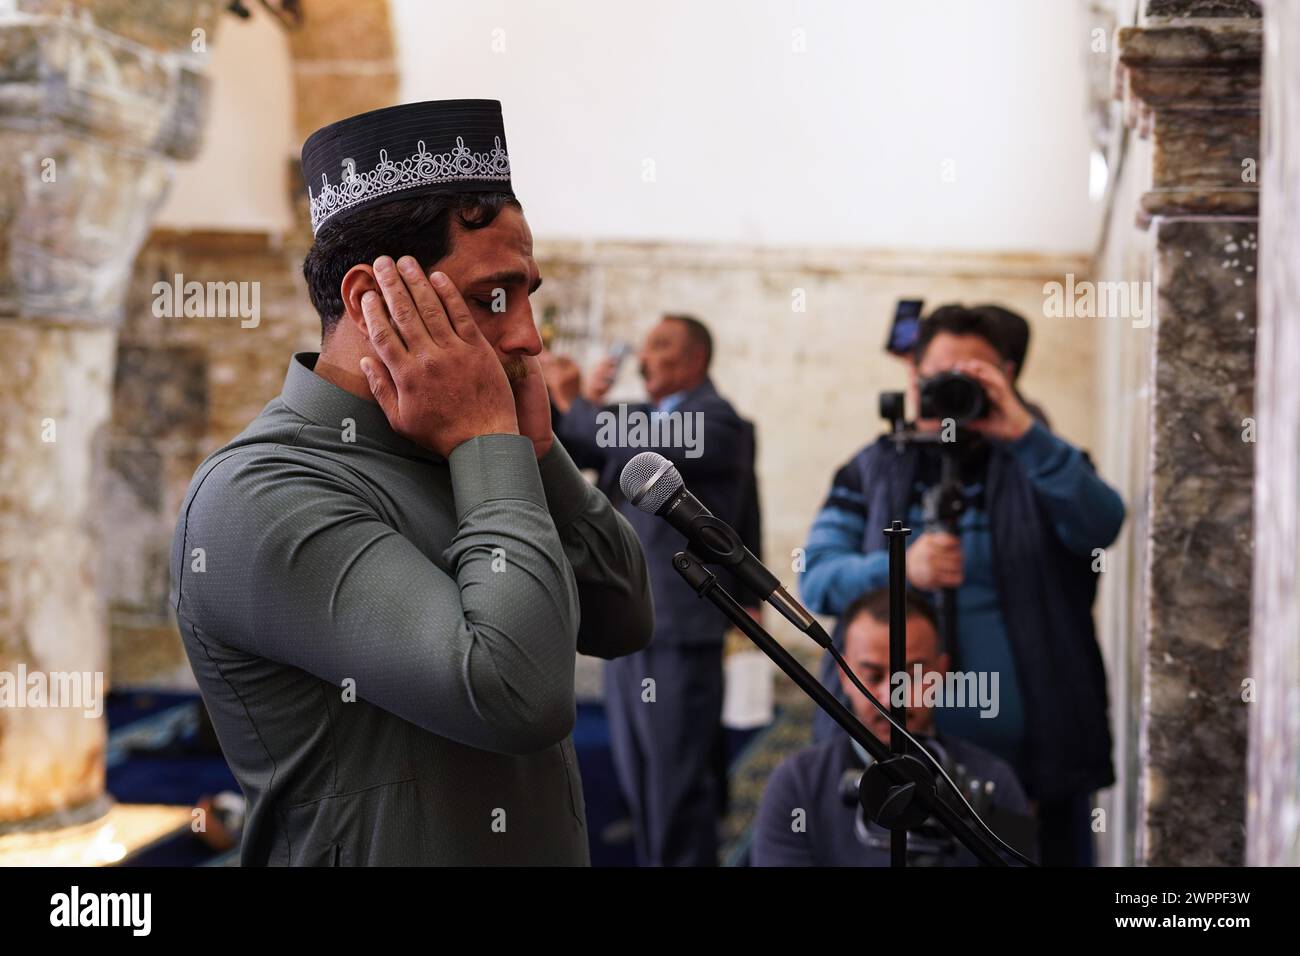 A Muslim performs the noon call to prayer at Al-Masfi (Umayad) mosque in the old city of Mosul after its reopening and completion of its restoration. The Umayad mosque also known Al-Masfi mosque is considered the oldest in Mosul, the second oldest mosque in Iraq, and the 5th oldest mosque in Islam. It dates back to the year 16 AH (637 AD). The mosque was damaged during the operations to liberate the city of Mosul from ISIS, and the mosque was reconstructed by the ALIPH organization in cooperation with LA GUILDE Association and Al-Tameer International Group, in cooperation with the Sunni Endowm Stock Photo